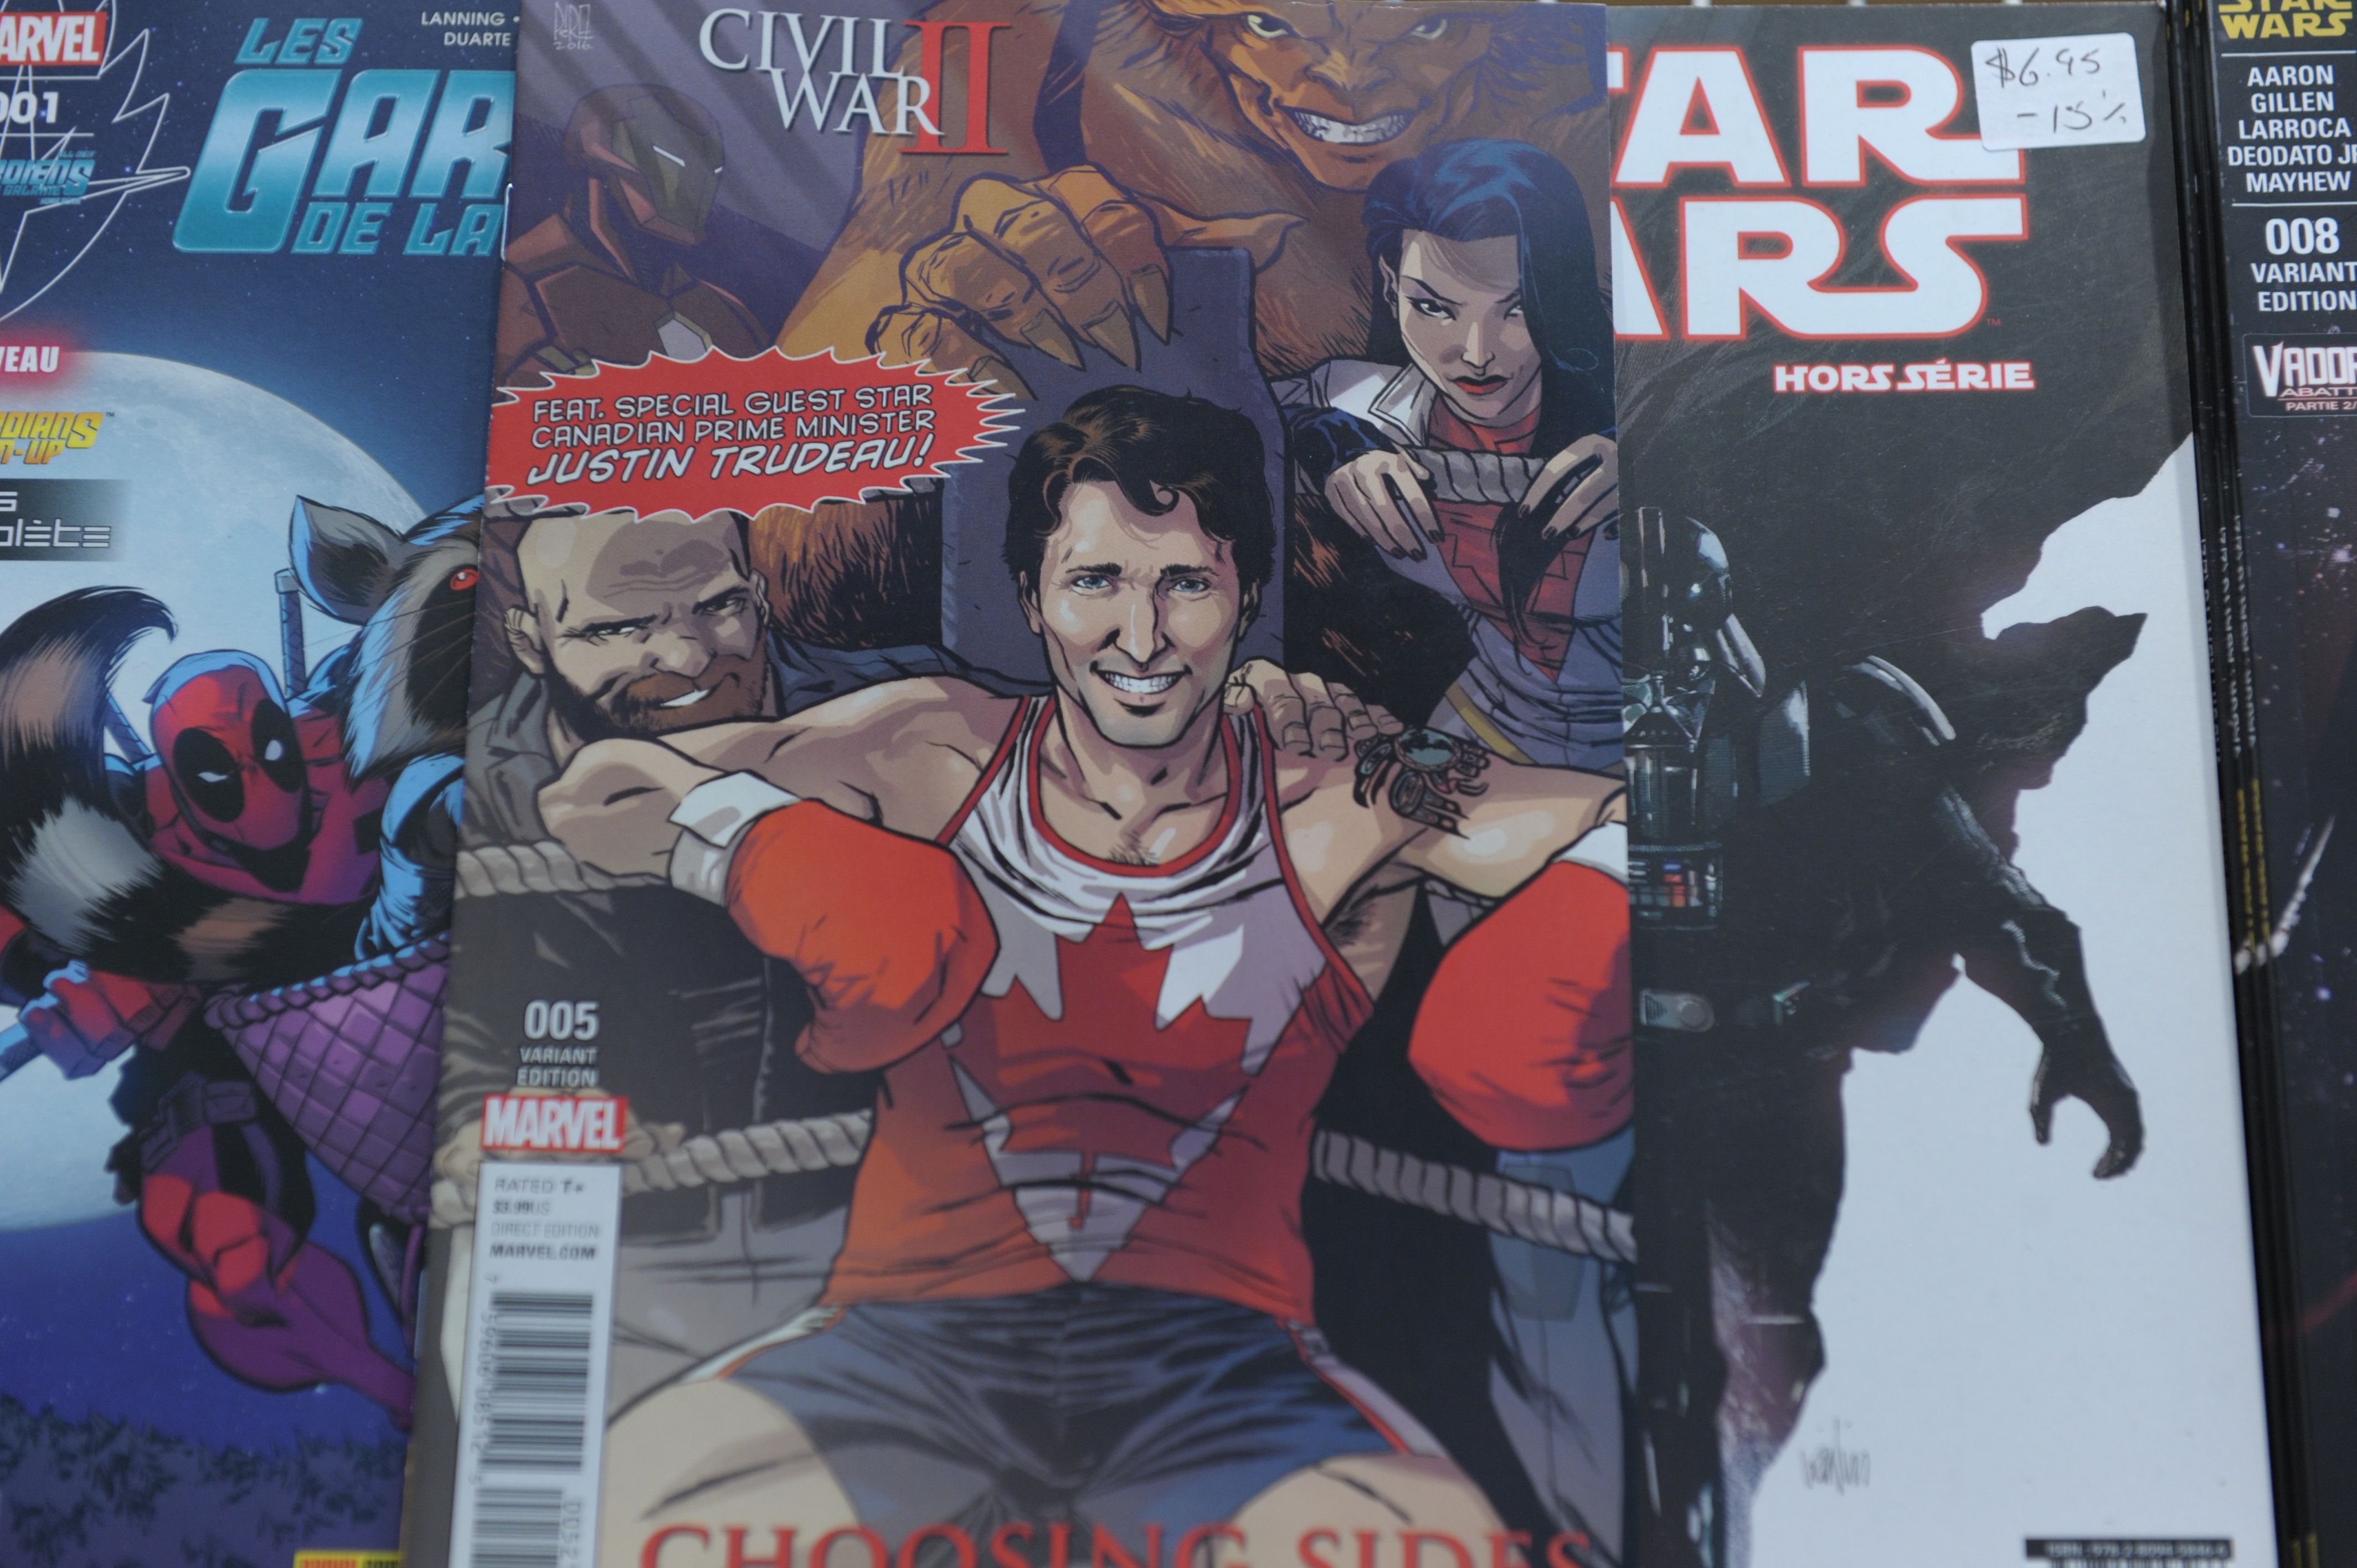 The cover of US publisher Marvel's comic book, featuring Canadian Prime Minister Justin Trudeau as a super hero in front of a newstand in Montreal, Canada on Aug. 31, 2016. 
                      
                      Canadian Prime Minister Justin Trudeau takes the role of a superhero in a comic book by US publisher Marvel released on newsstands August 31 in Canada. Trudeau appears smiling in a corner of a boxing ring on the cover of the comic book, a limited edition in English of the series "Civil War II: Choosing Sides" wearing a maple leaf shirt.  / AFP / Marc BRAIBANT / TO GO WITH AFP STORY BY MARC BRAIBANT        (Photo credit should read MARC BRAIBANT/AFP/Getty Images) (MARC BRAIBANT—AFP/Getty Images)